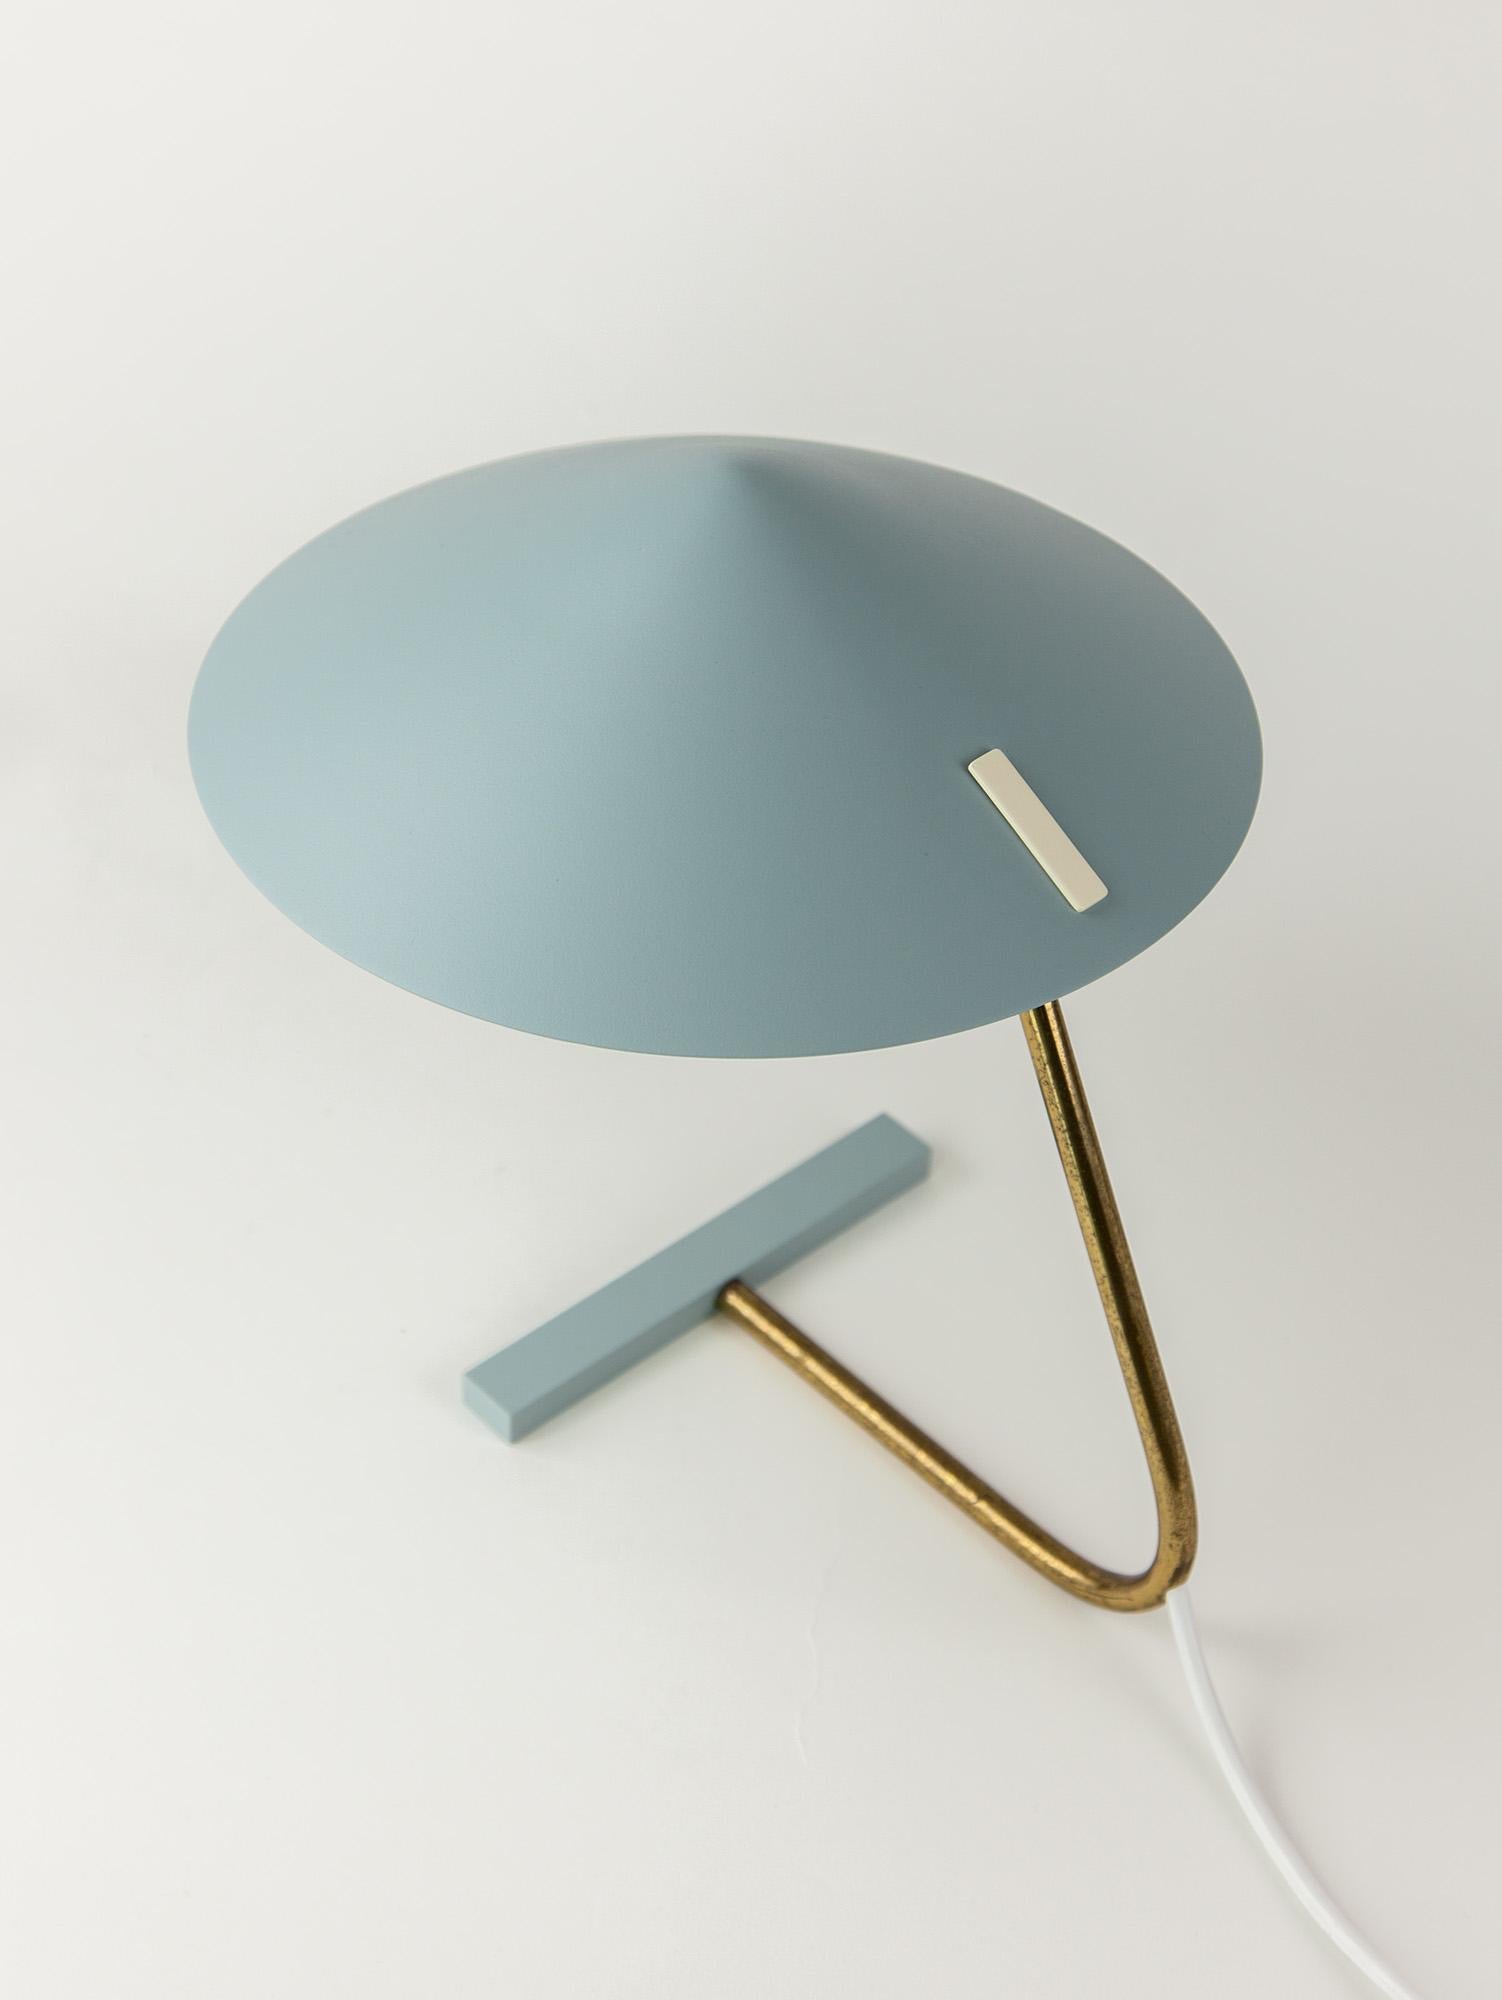 Stilux Milano Modernist Table Lamp, Italy, 1950s  For Sale 8